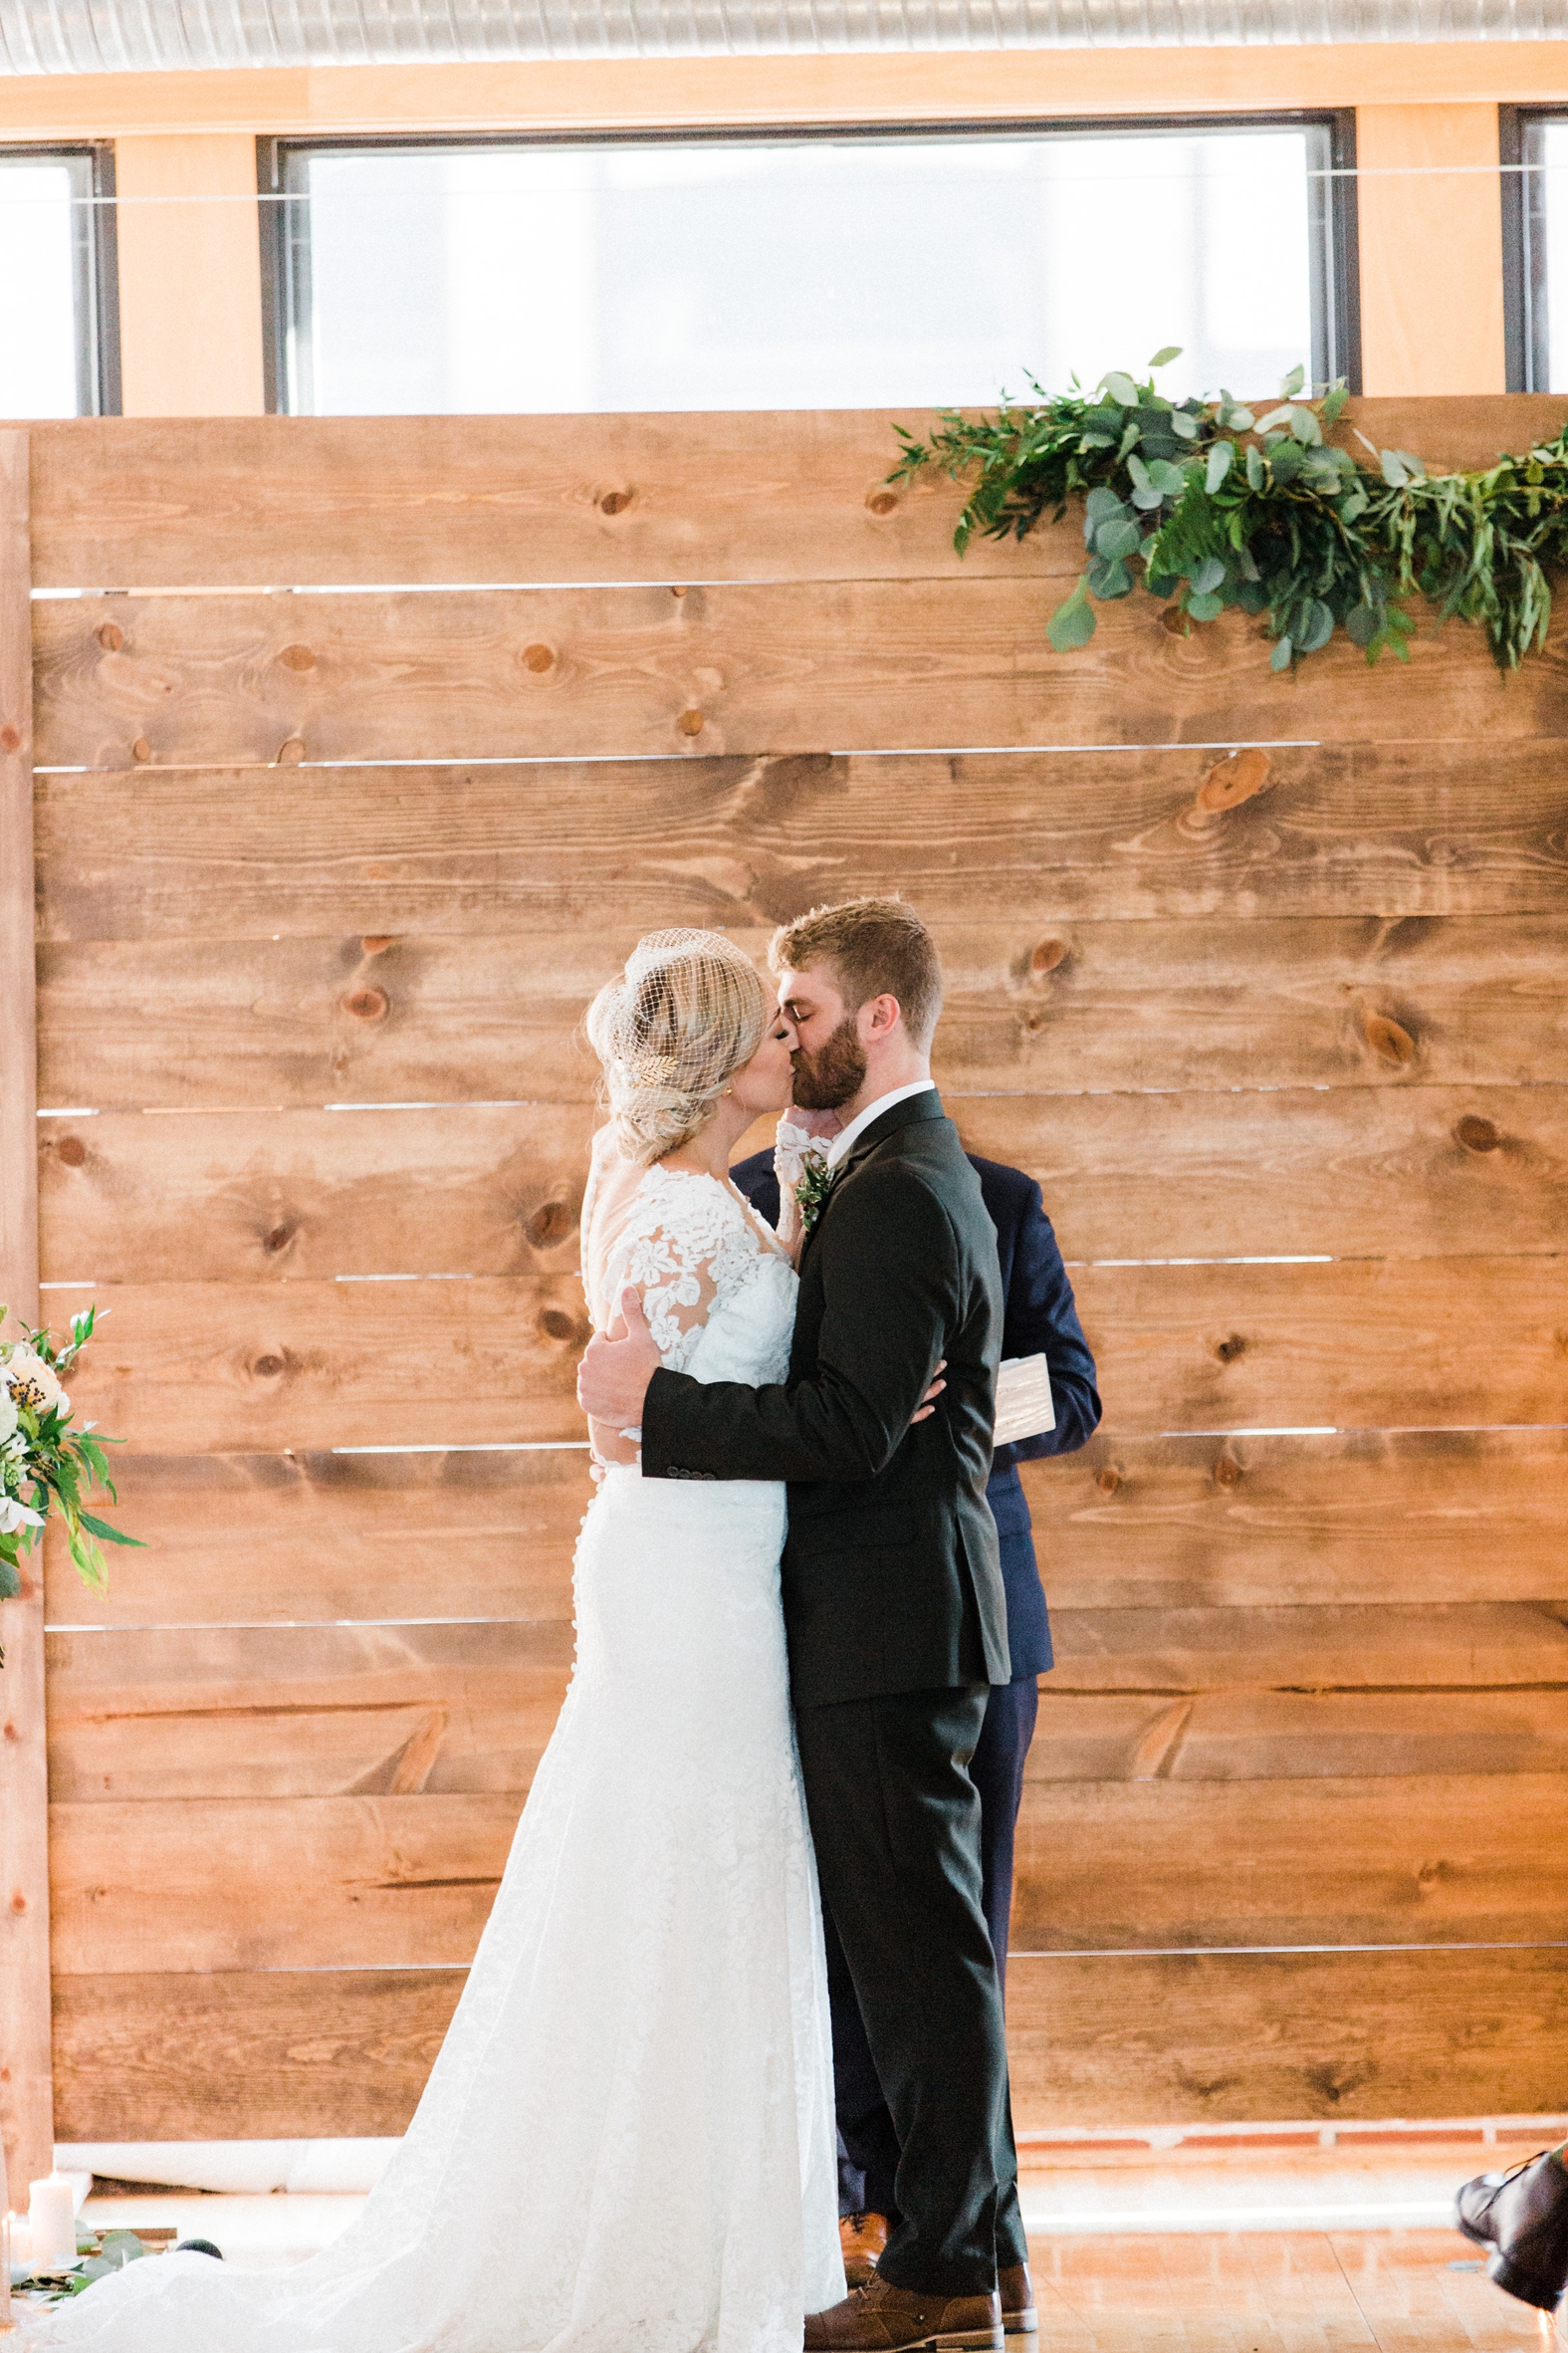 Bride and groom kiss at wedding ceremony at Windows on Washington. Wood backdrop with greenery. Bride in lace long sleeve dress with birdcage veil; groom in olive green suit.